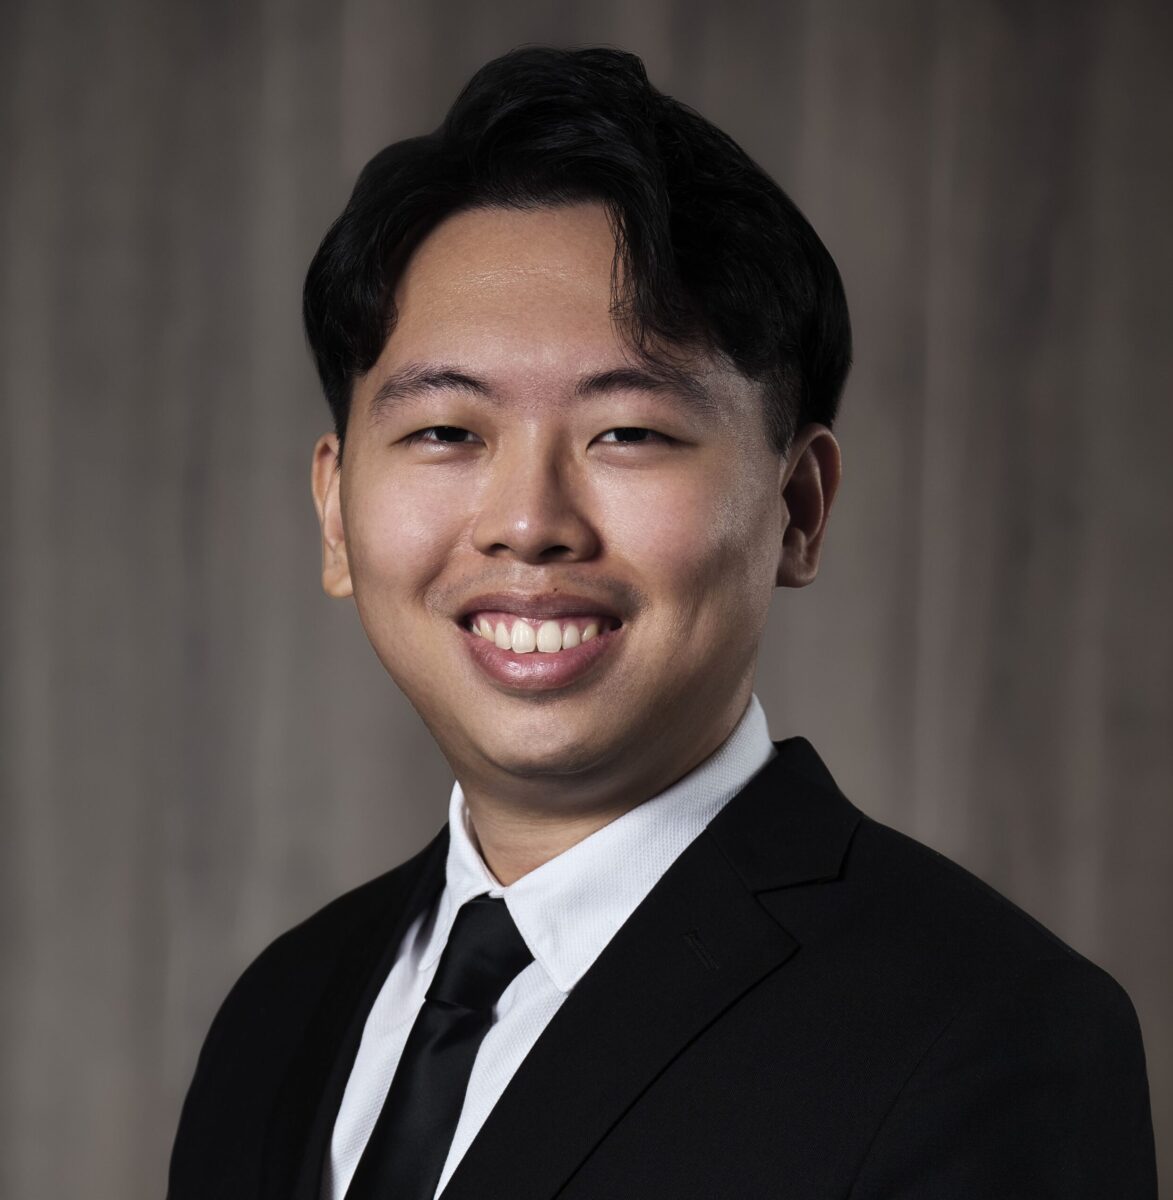 Corporate lawyer Thomas Lee, associate at Singapore law firm Yuen Law LLC